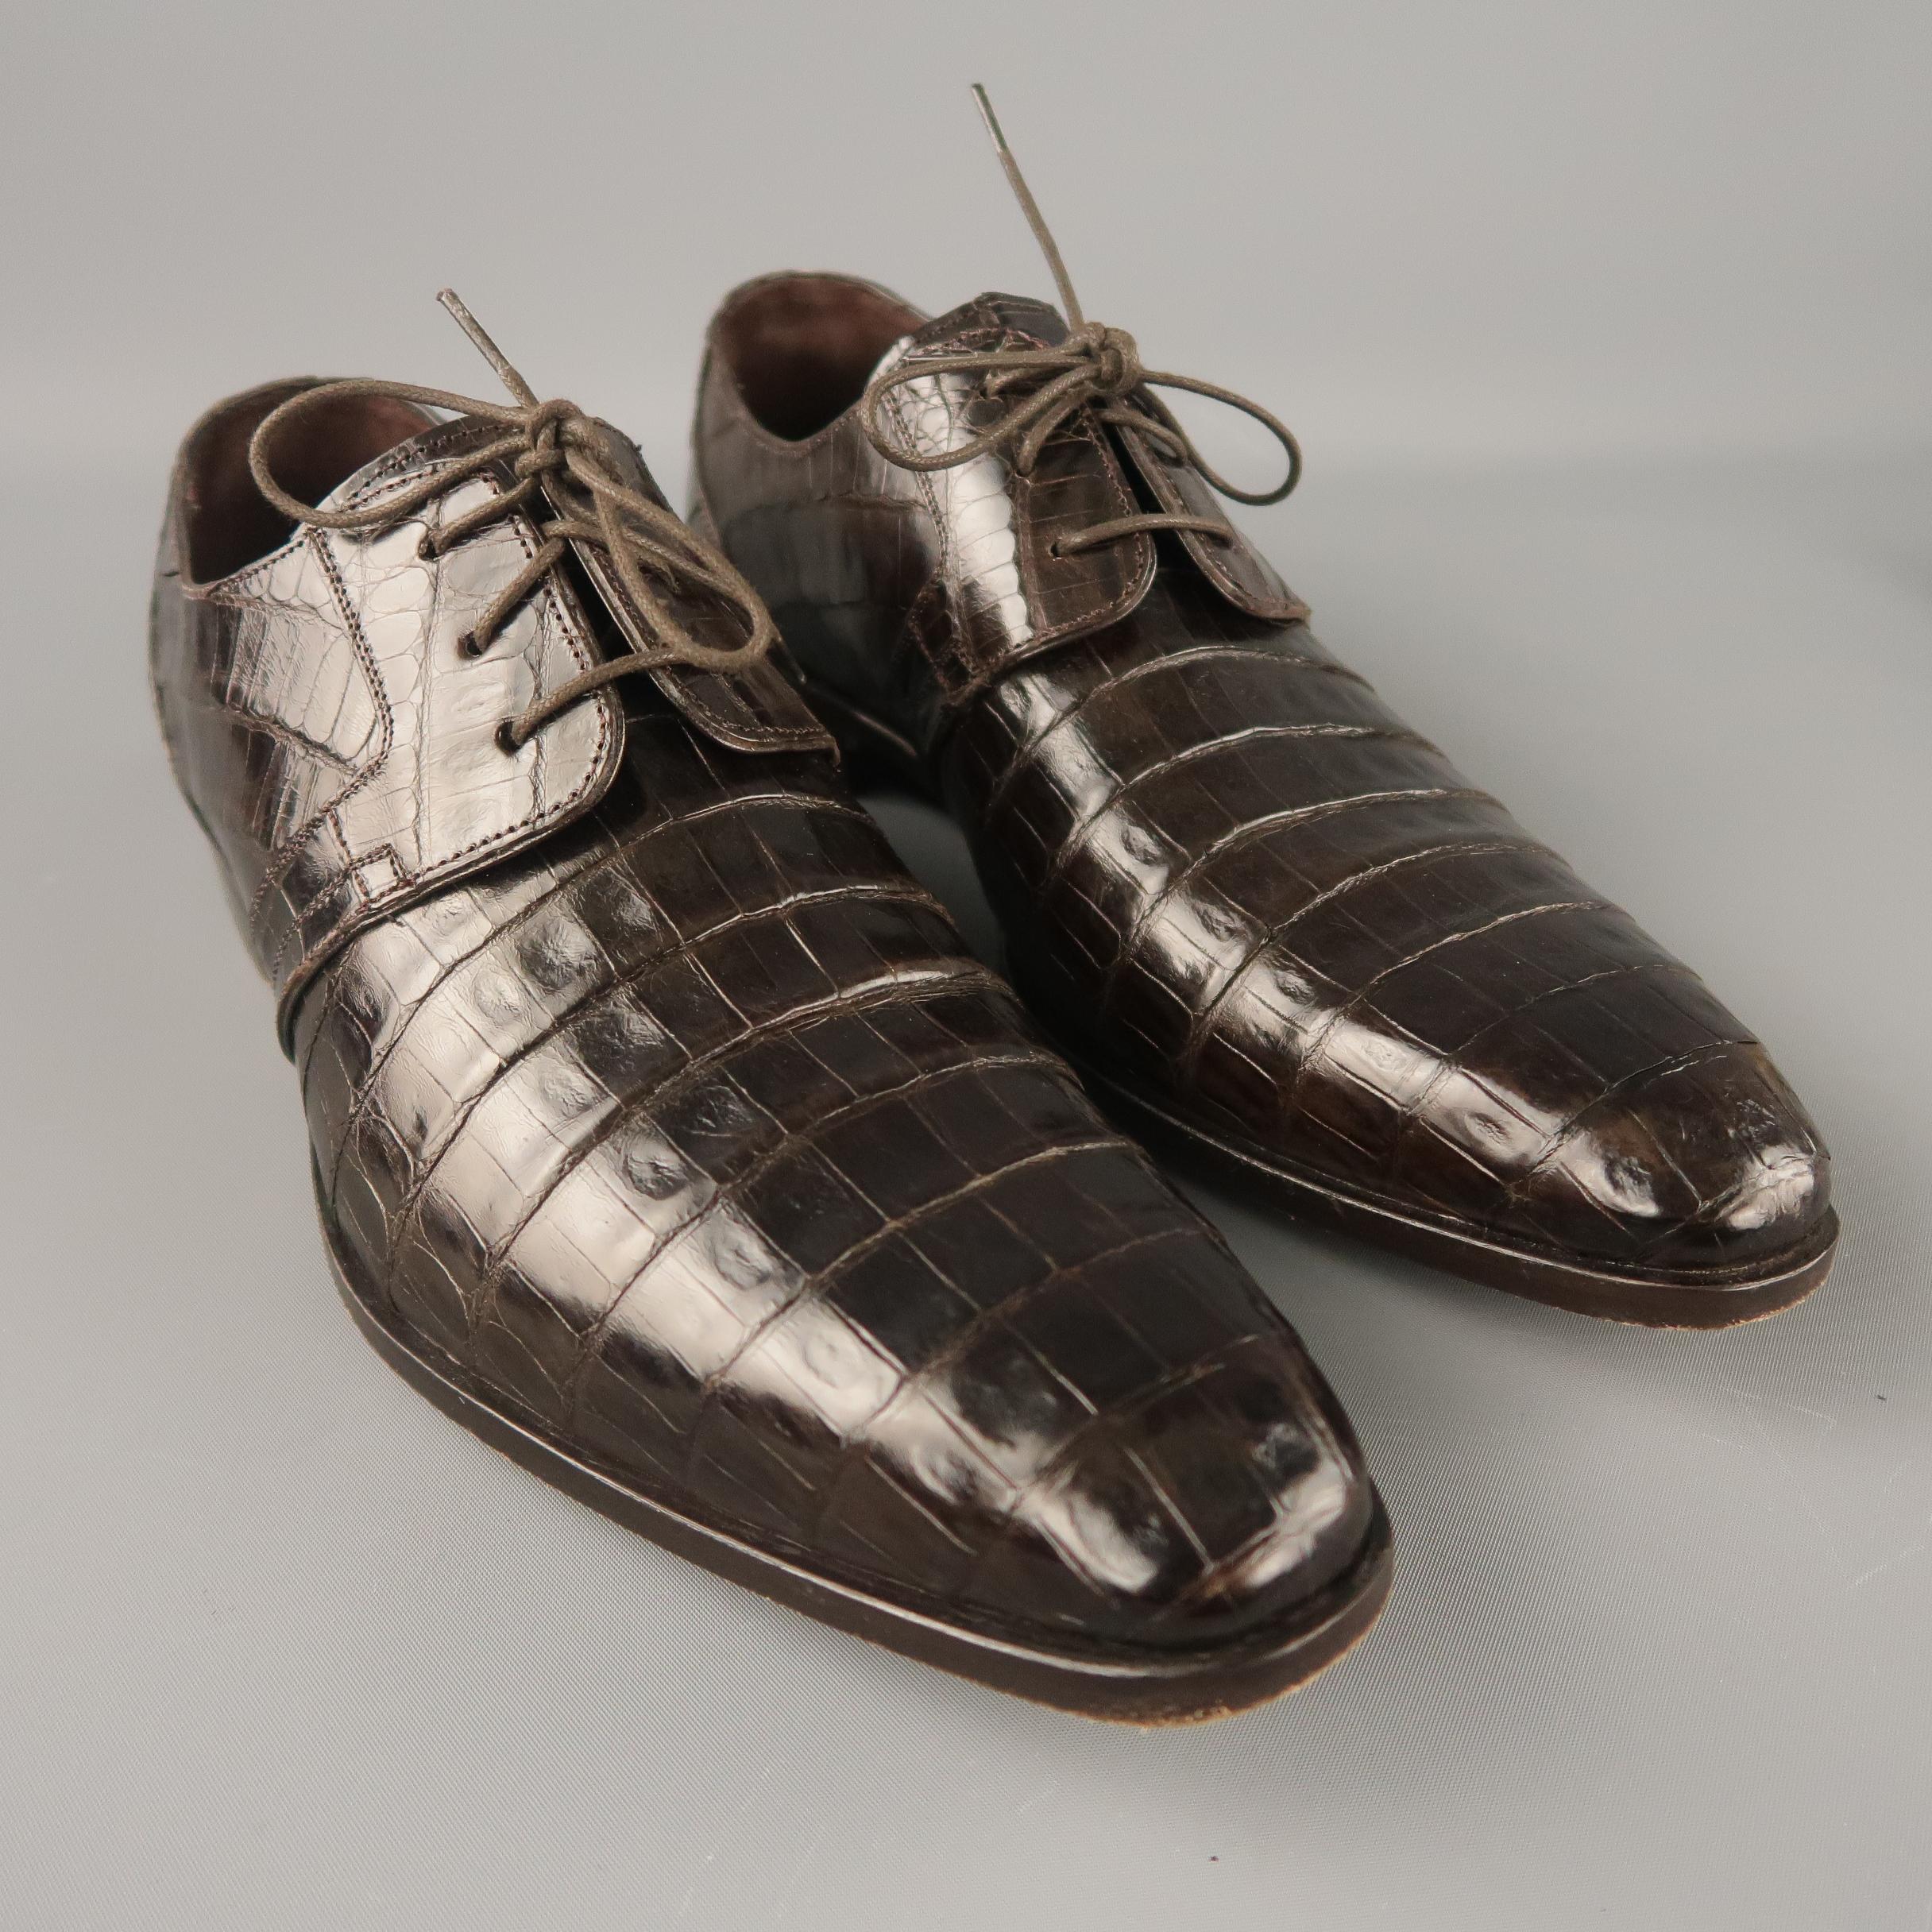 MEZLAN lace up shoes come in a brown alligator material featuring a wooden sole. Made in Spain.
 
Excellent Pre-Owned Condition.
Original retail price: $1,295.00
Marked: 9 M
 
Measurements:
 
Length: 12.5 in.
Width: 4.3 in.